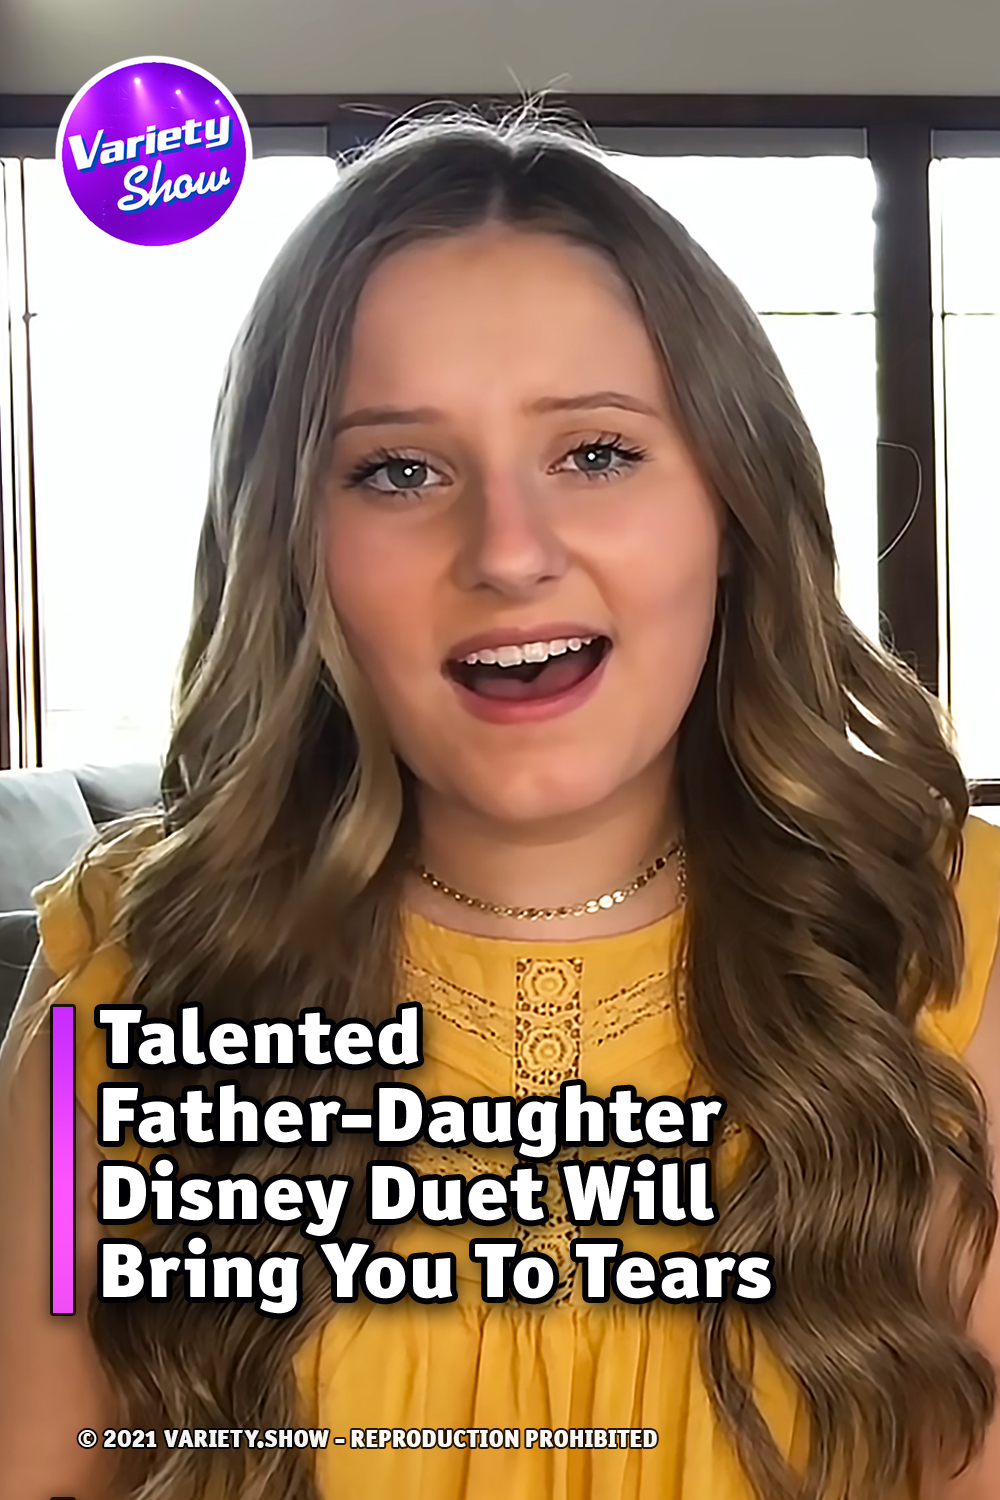 Talented Father-Daughter Disney Duet Will Bring You To Tears